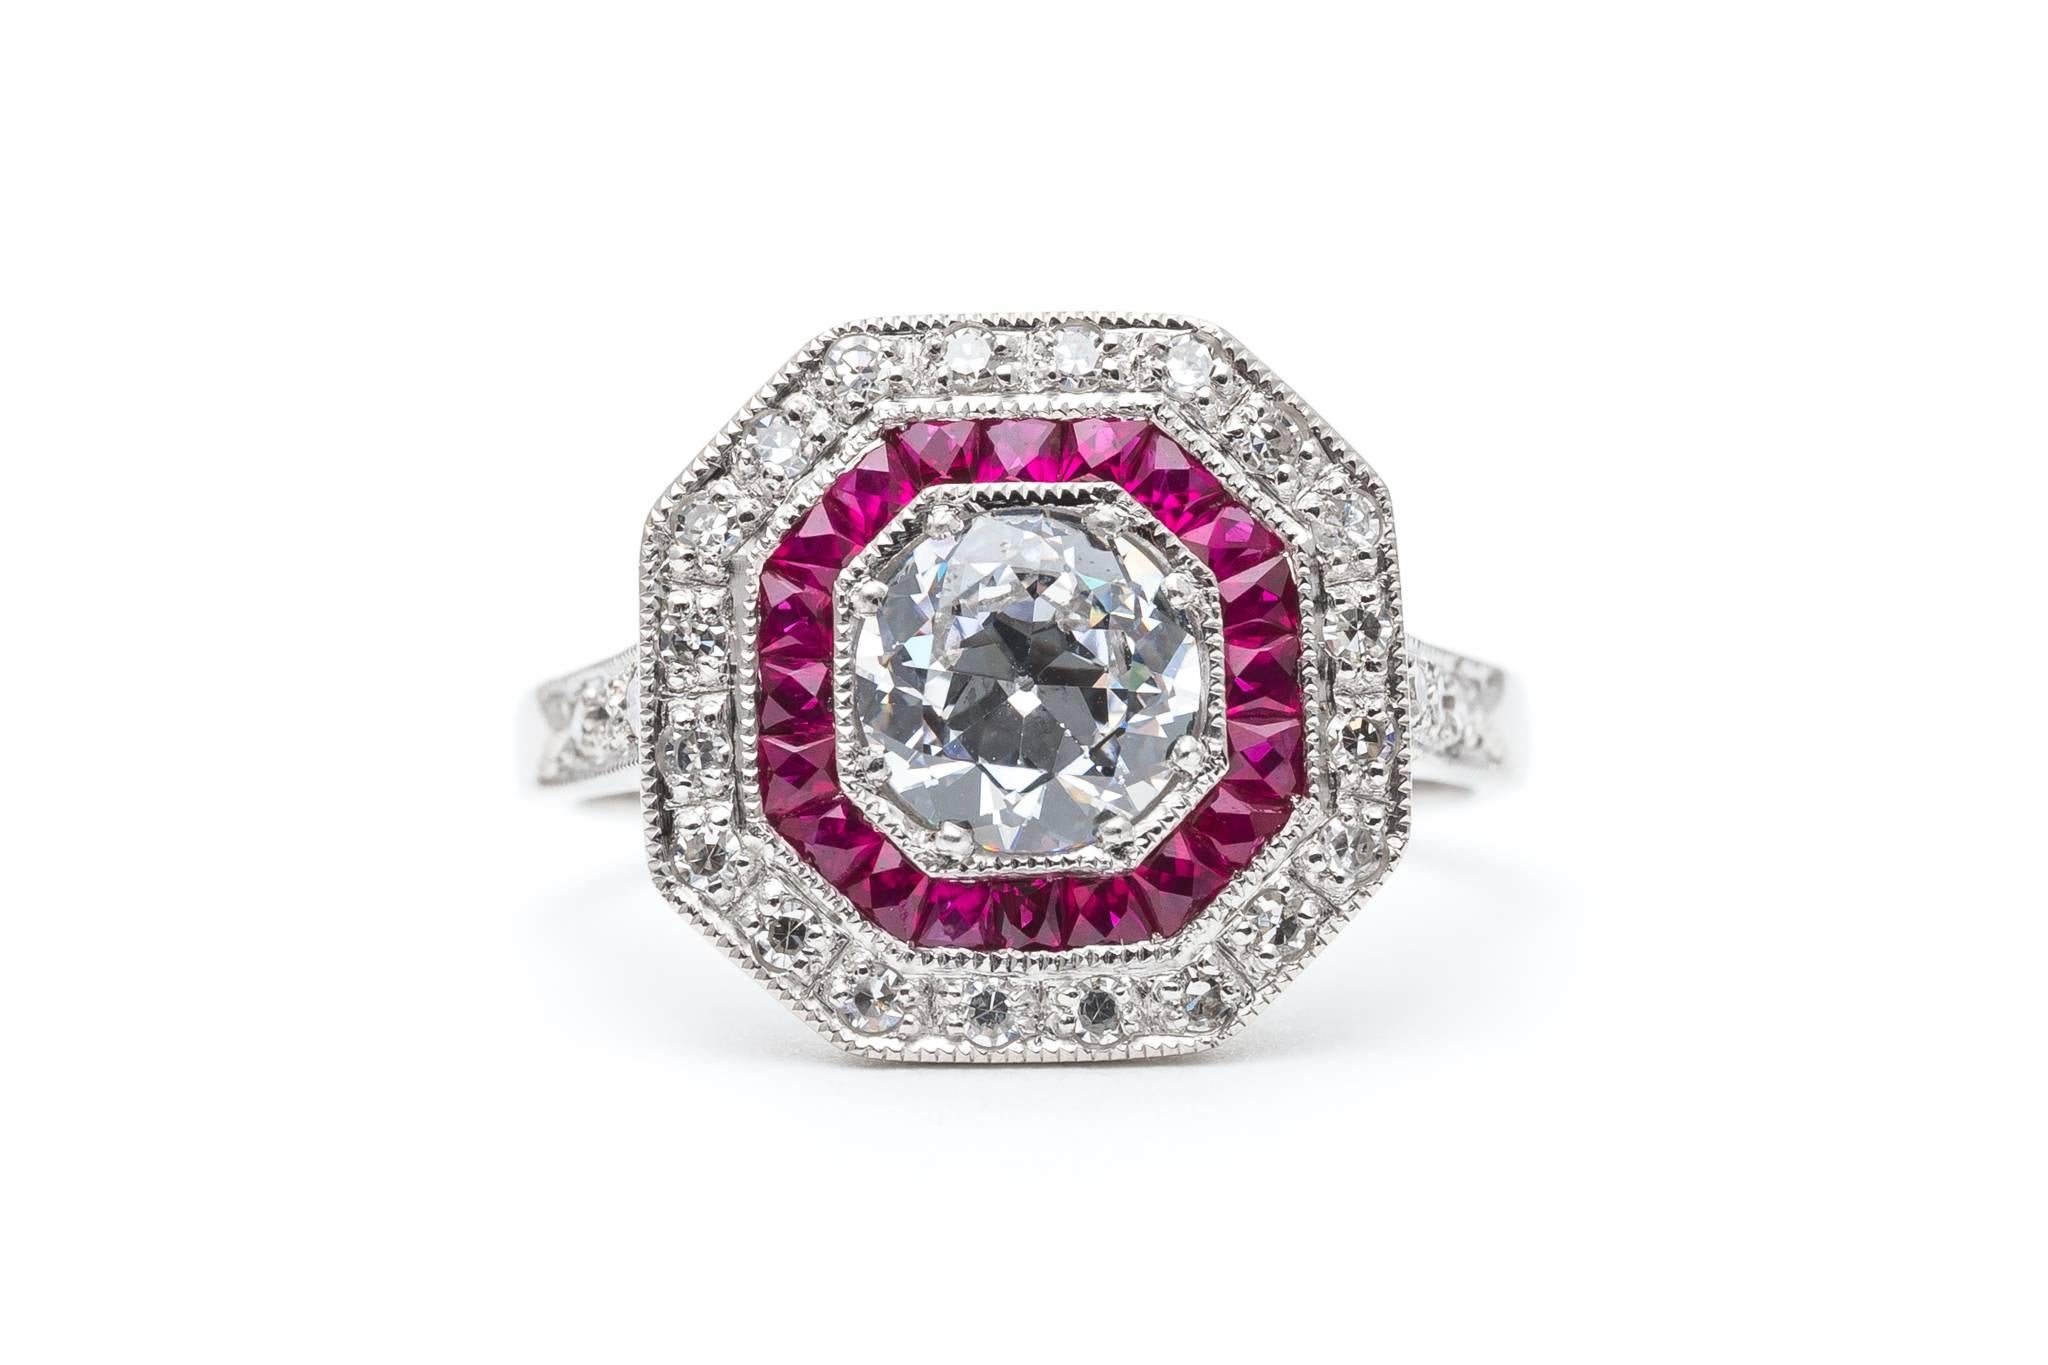 An exceptionally beautiful ruby and diamond ring in luxurious platinum. Featuring beautiful French cut rubies, sparkling single cut and antique mine cut diamonds, and hand applied mille grain beading, this ring is a truly stunning engagement